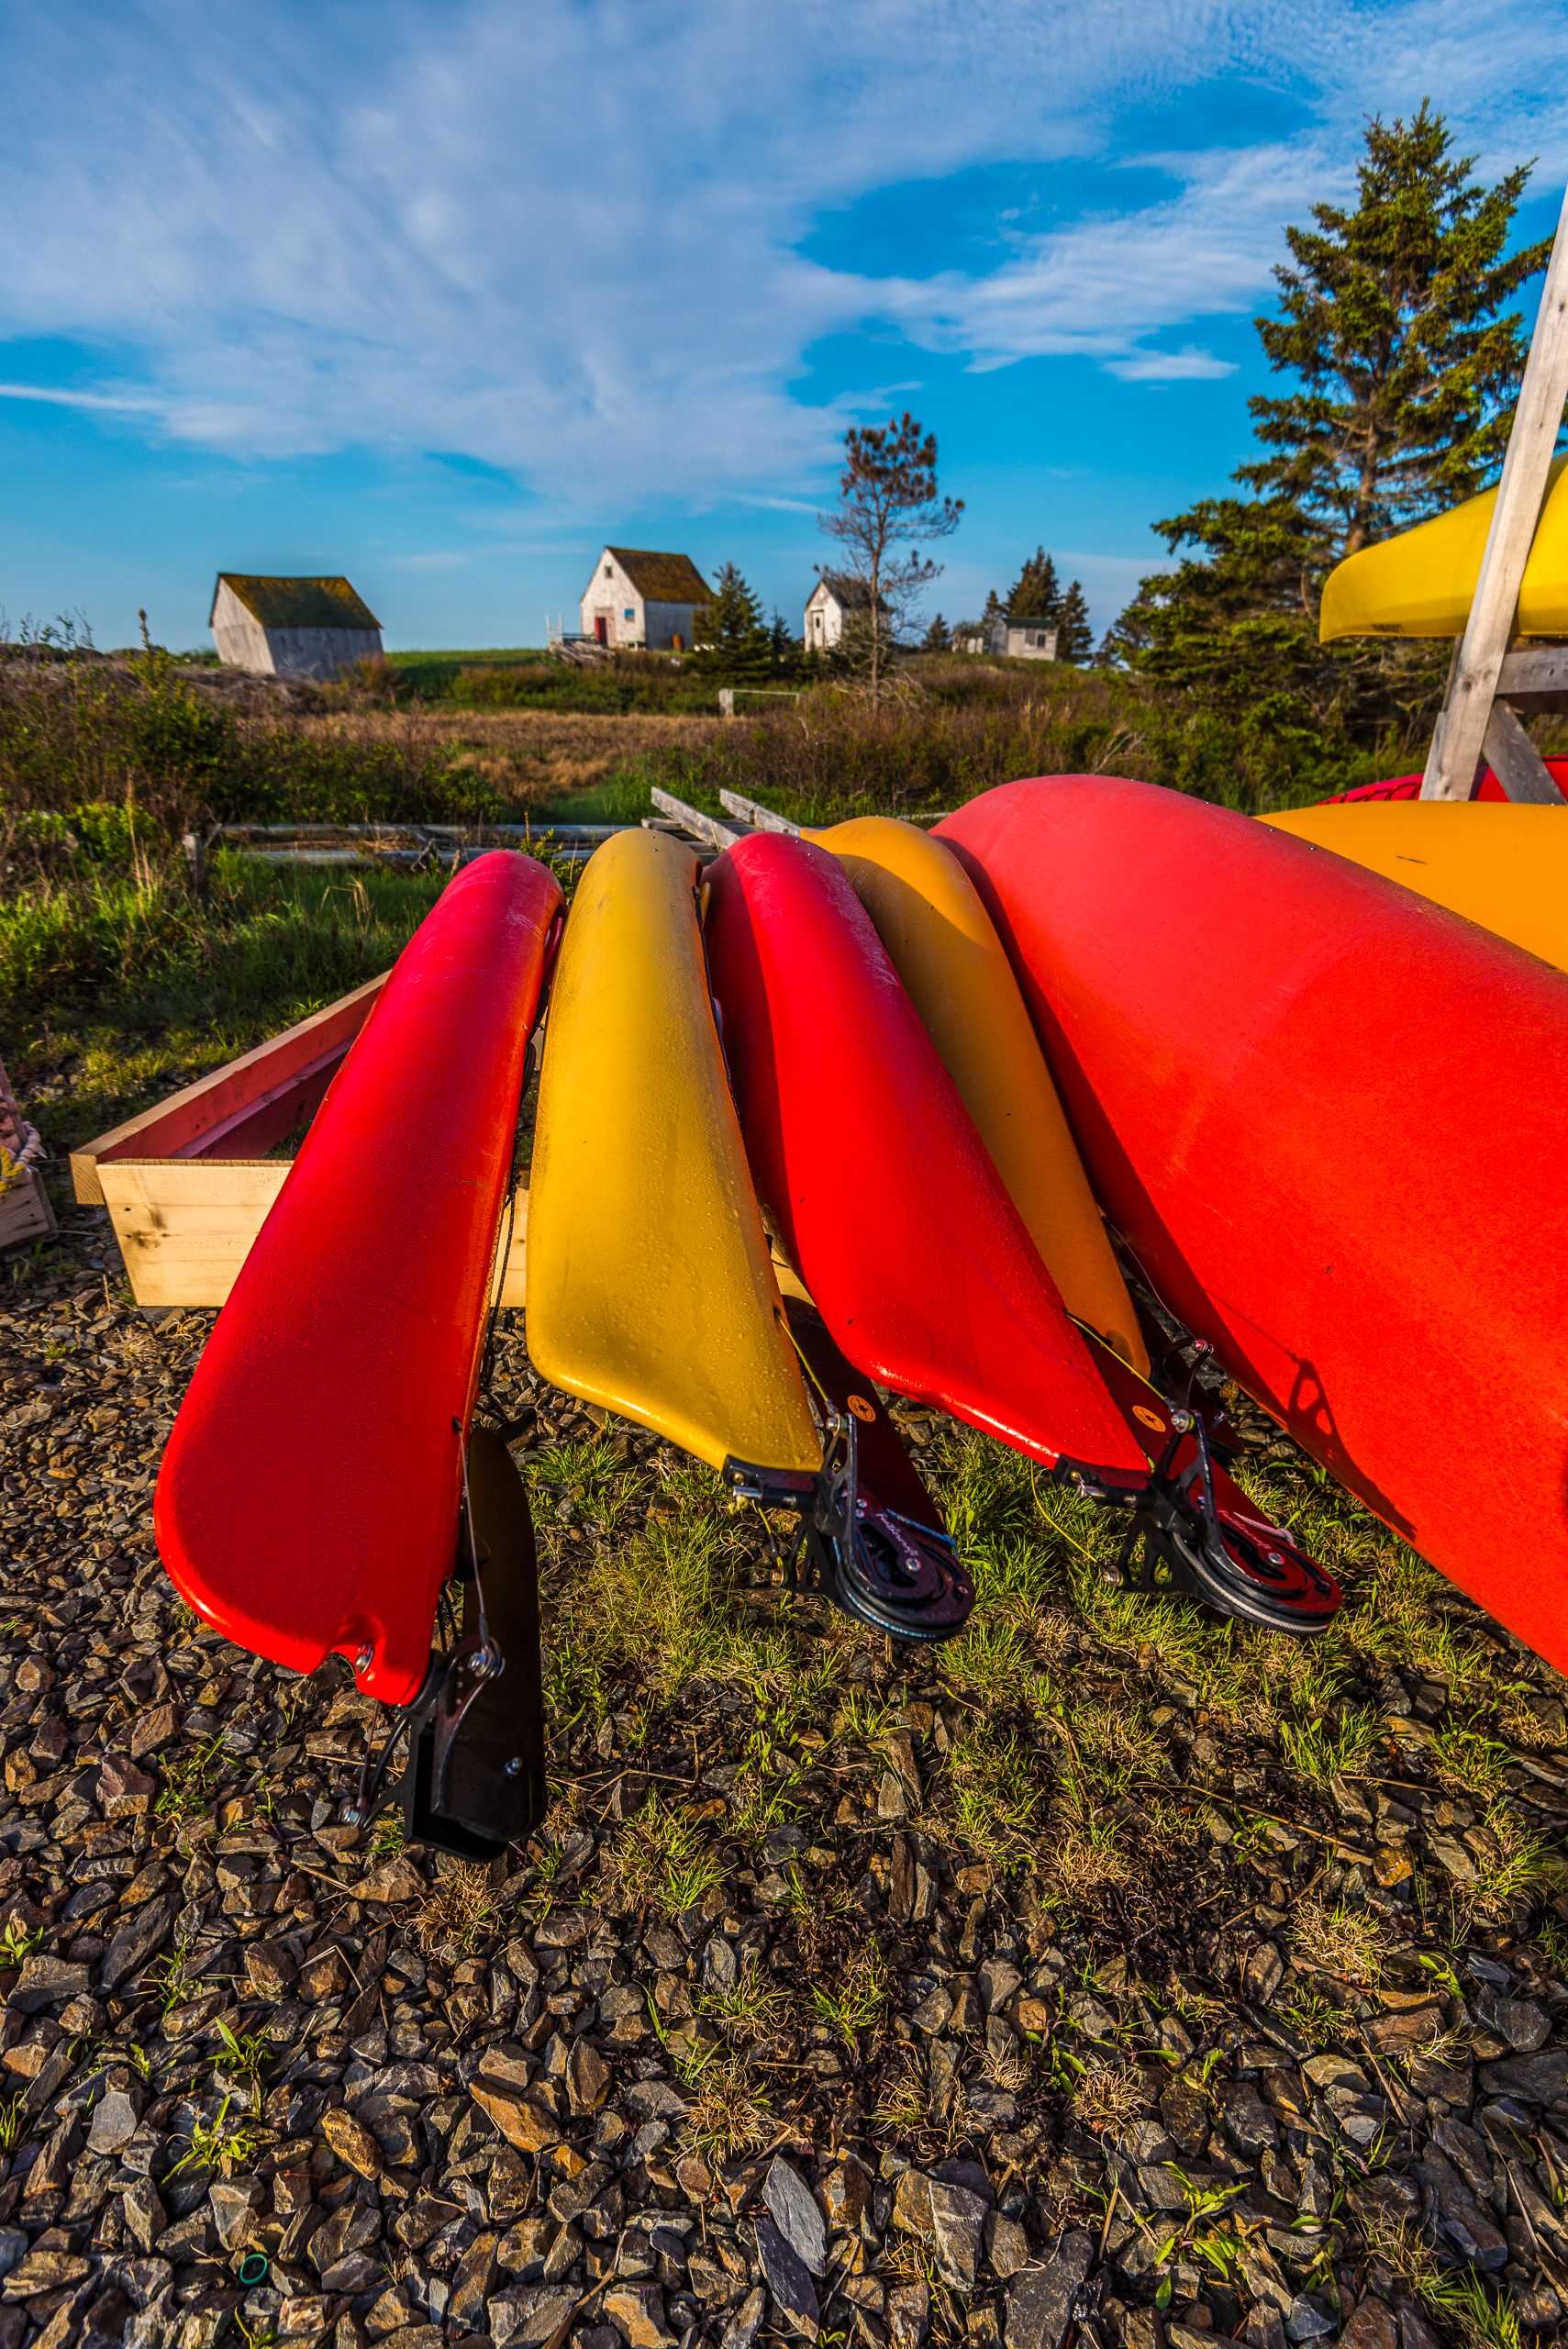 Six brightly coloured kayaks lined up on a wood base